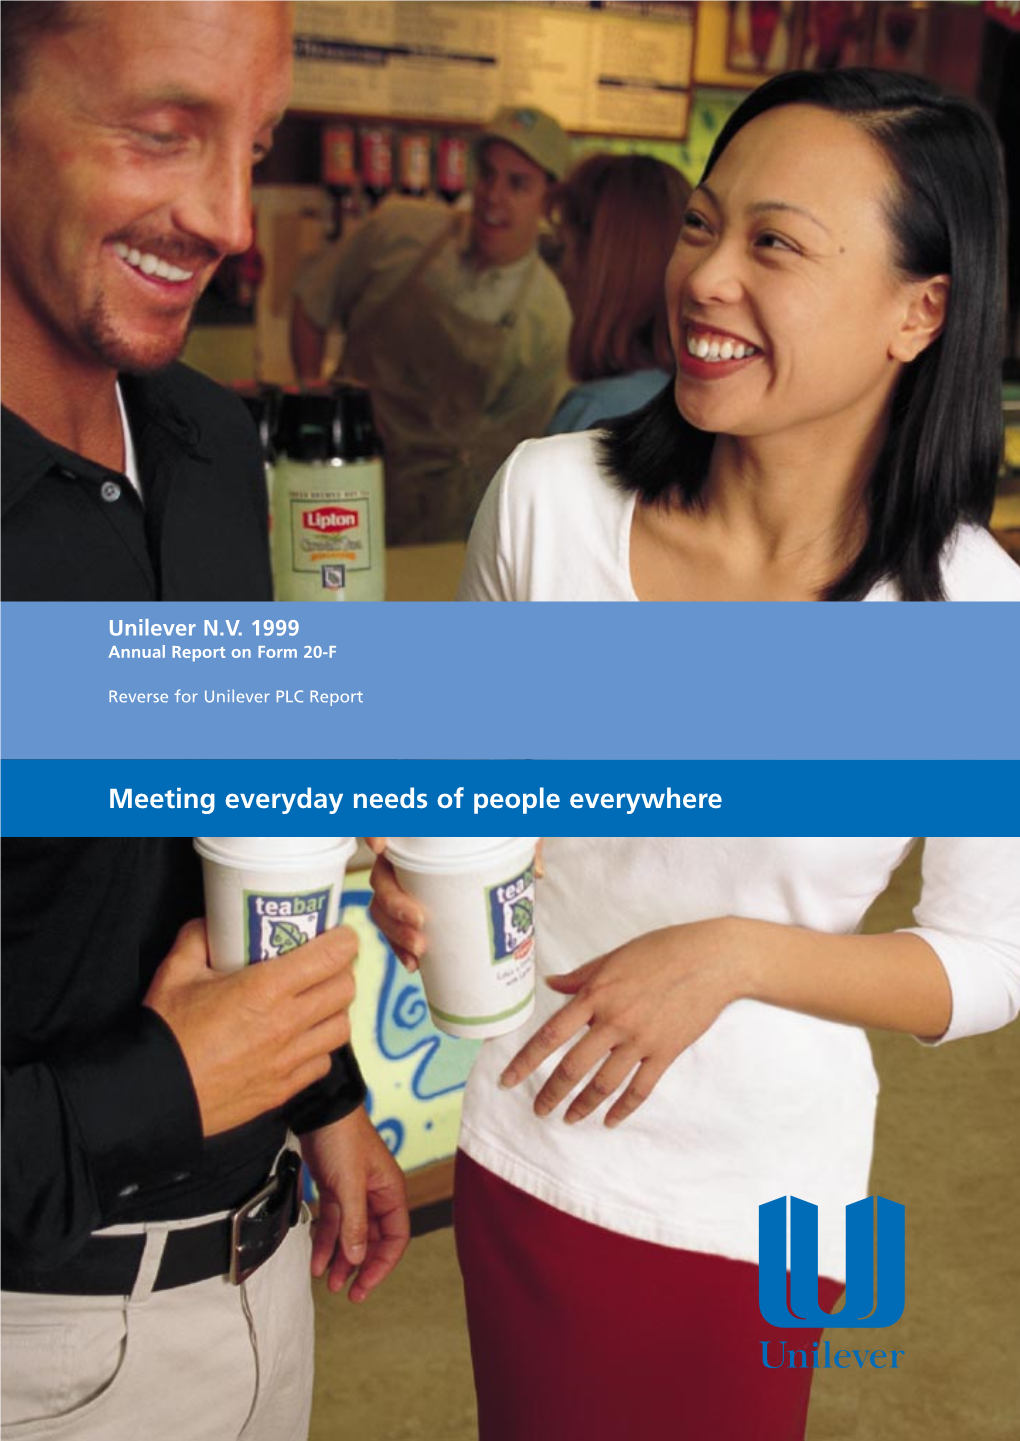 Annual Report 1999 on Form 20-F for Unilever NV